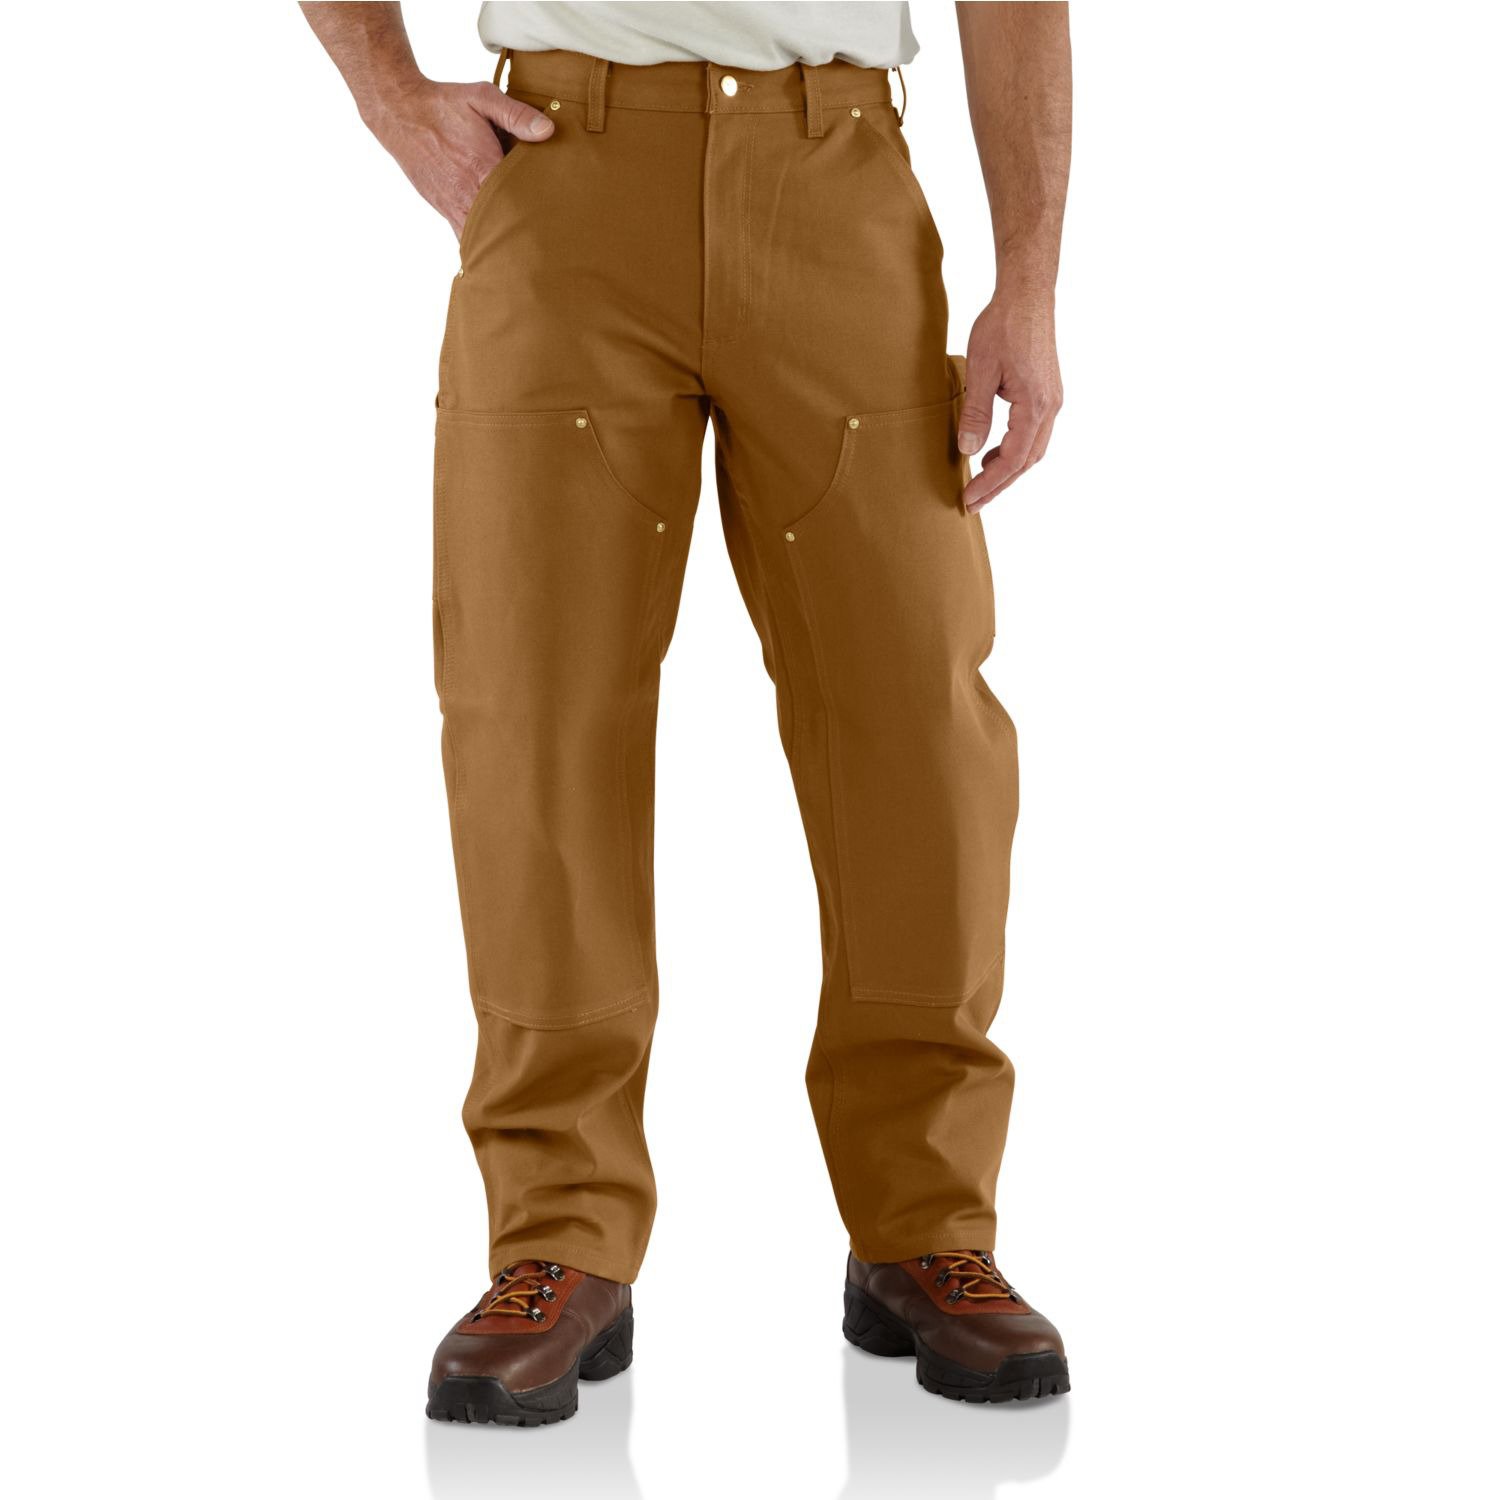 Carhartt Men's Double Front Work Dungaree                                                                                        - view number 1 selected